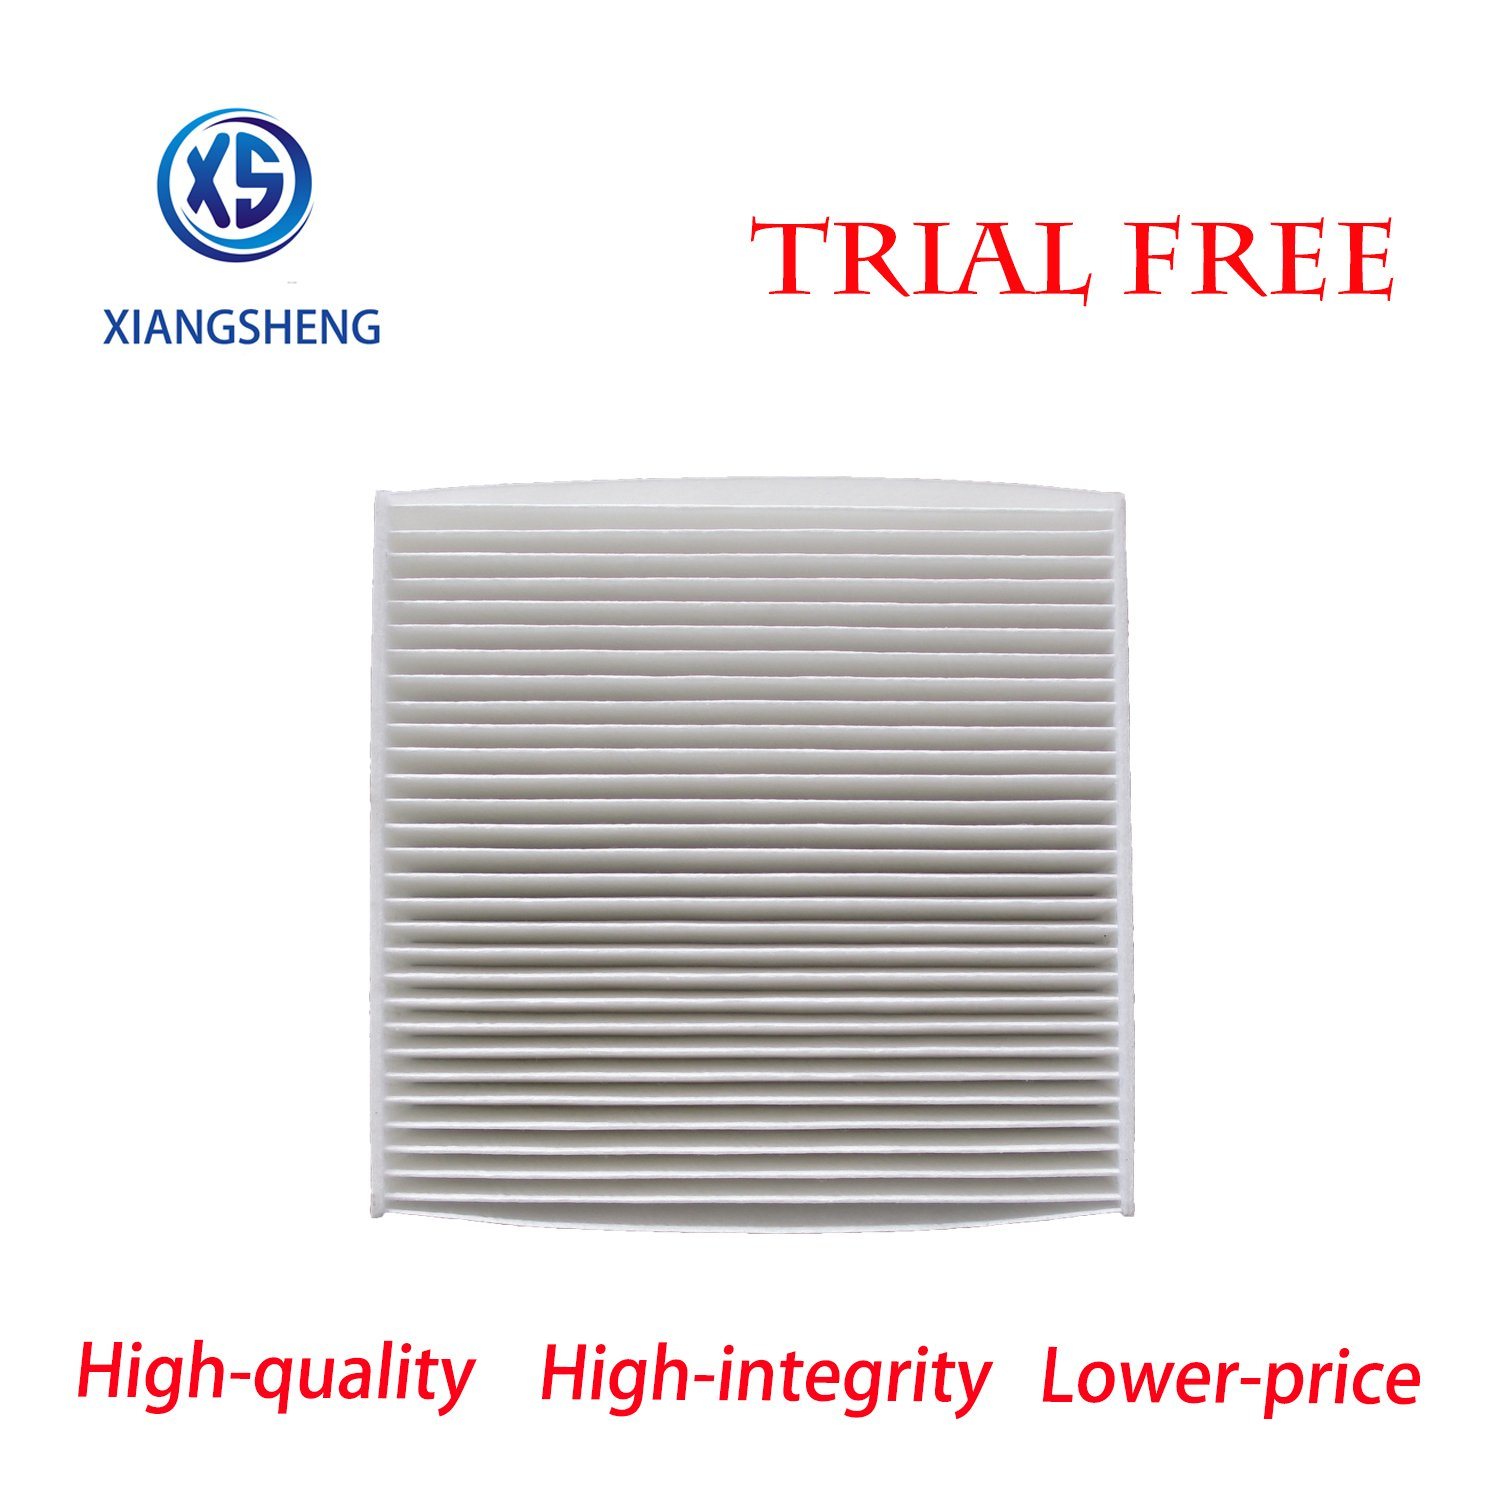 Auto Filter Manufacturer Supply High Quality Genuine Parts Car Air Filter Conditioning Filter Auto Cabin Air Filter 88568-B4010 for Toyota